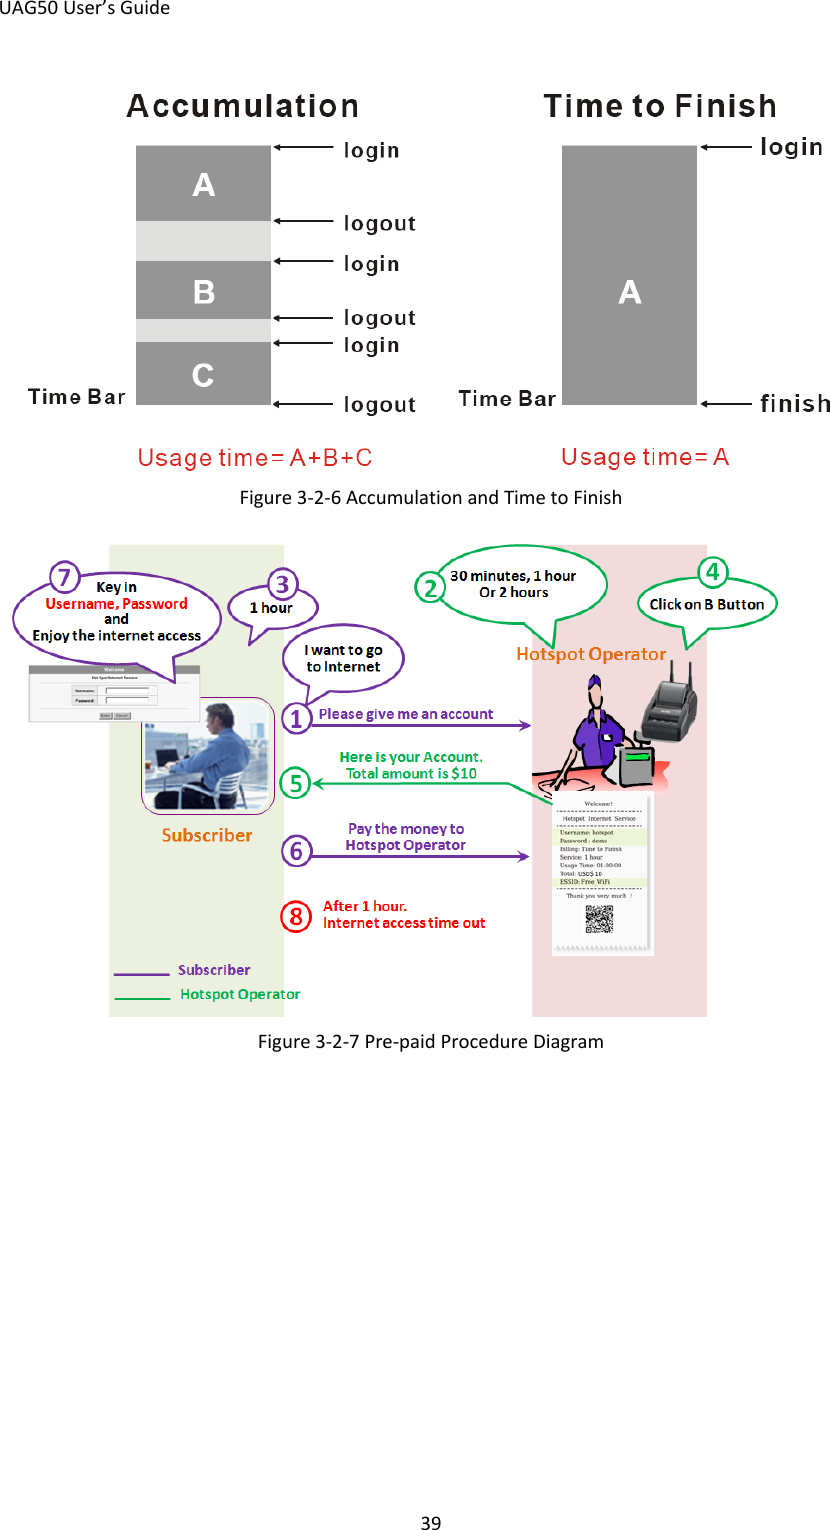 UAG50 User’s Guide 39  Figure 3-2-6 Accumulation and Time to Finish  Figure 3-2-7 Pre-paid Procedure Diagram  